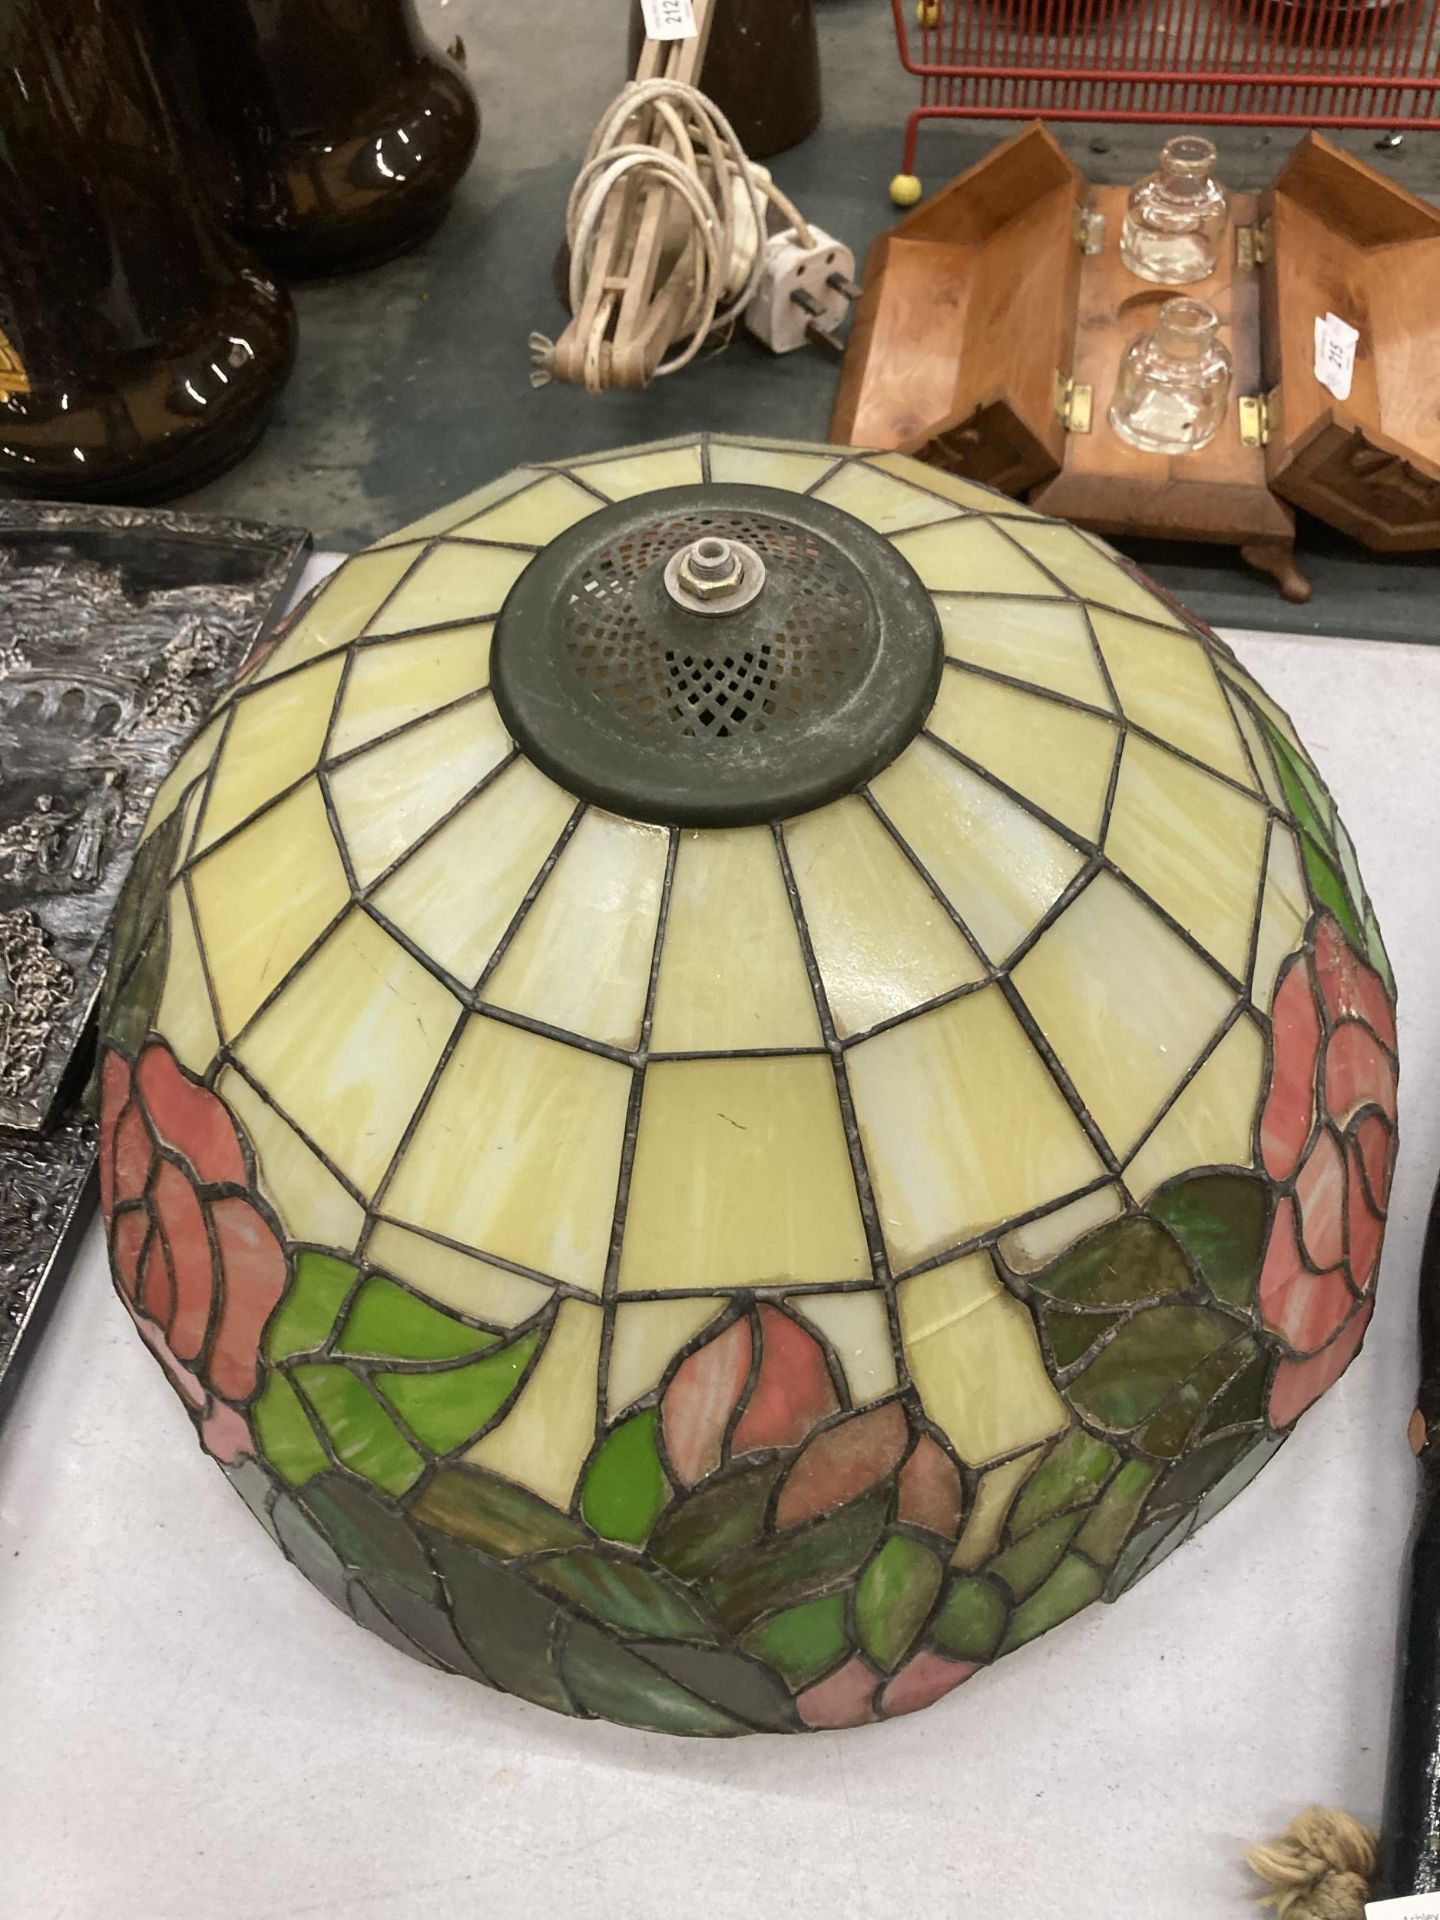 A TIFFANY STYLE LEADED GLASS LAMP SHADE, 42CM - A/F TO BASE